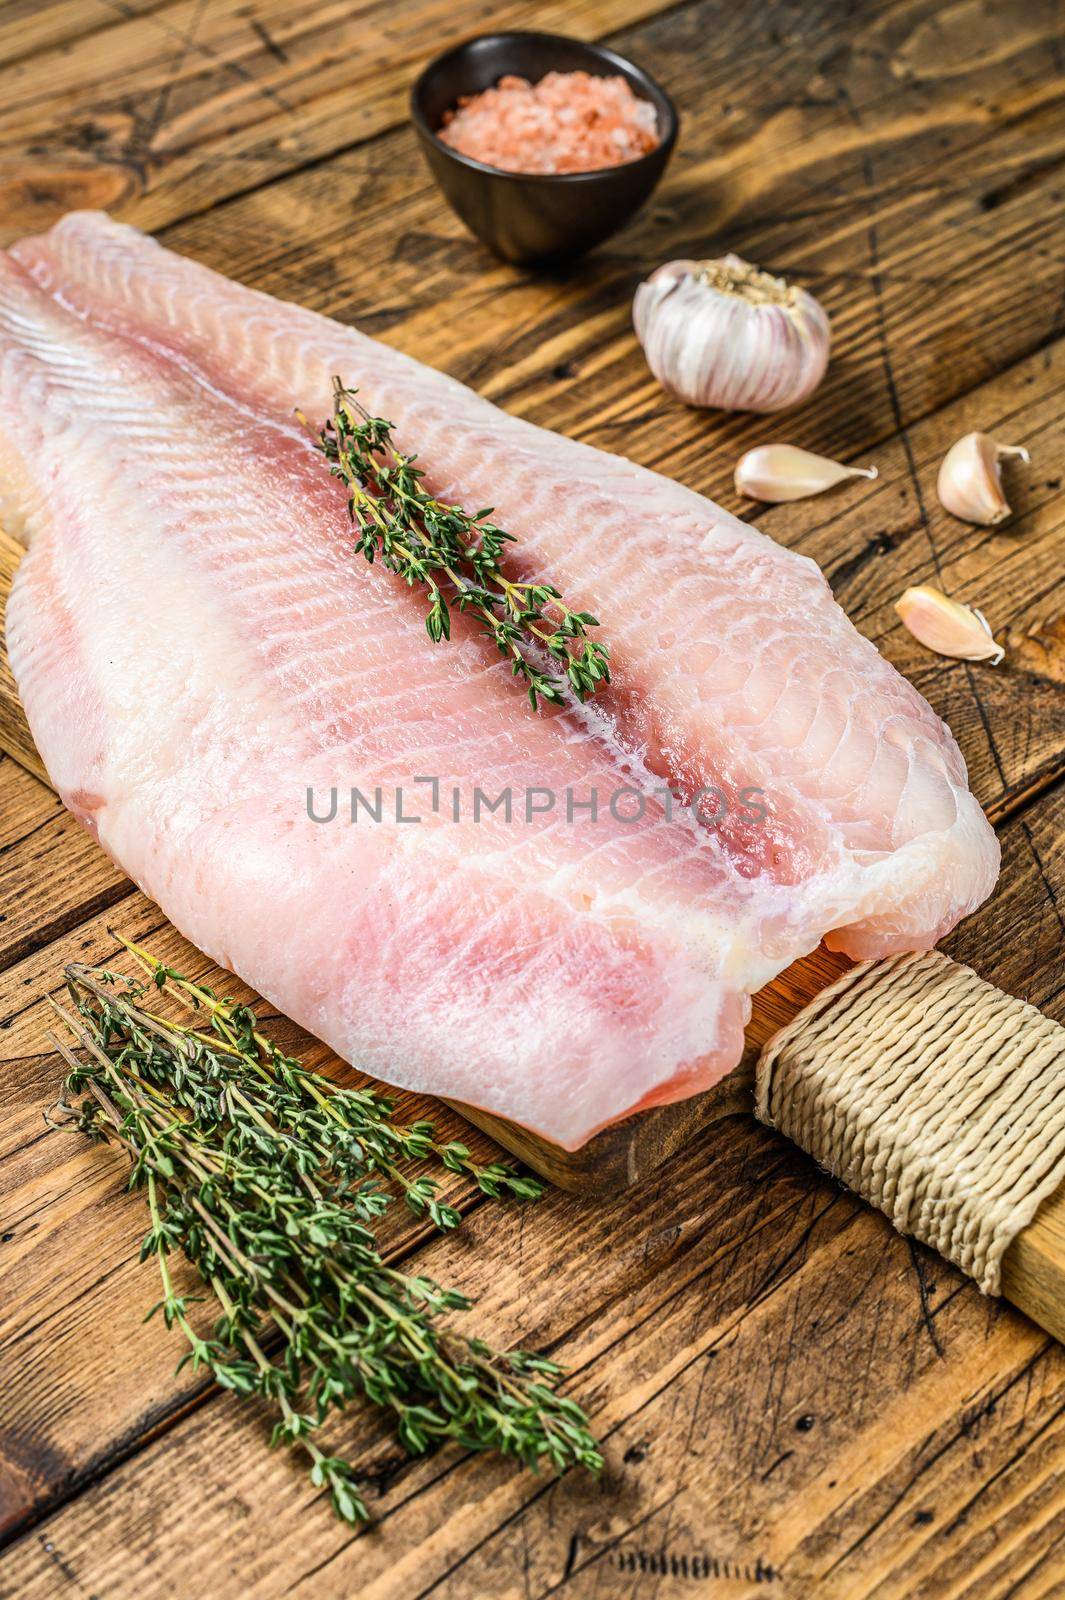 Raw fillet of pangasius fish on a cutting board. Wooden background. Top view by Composter